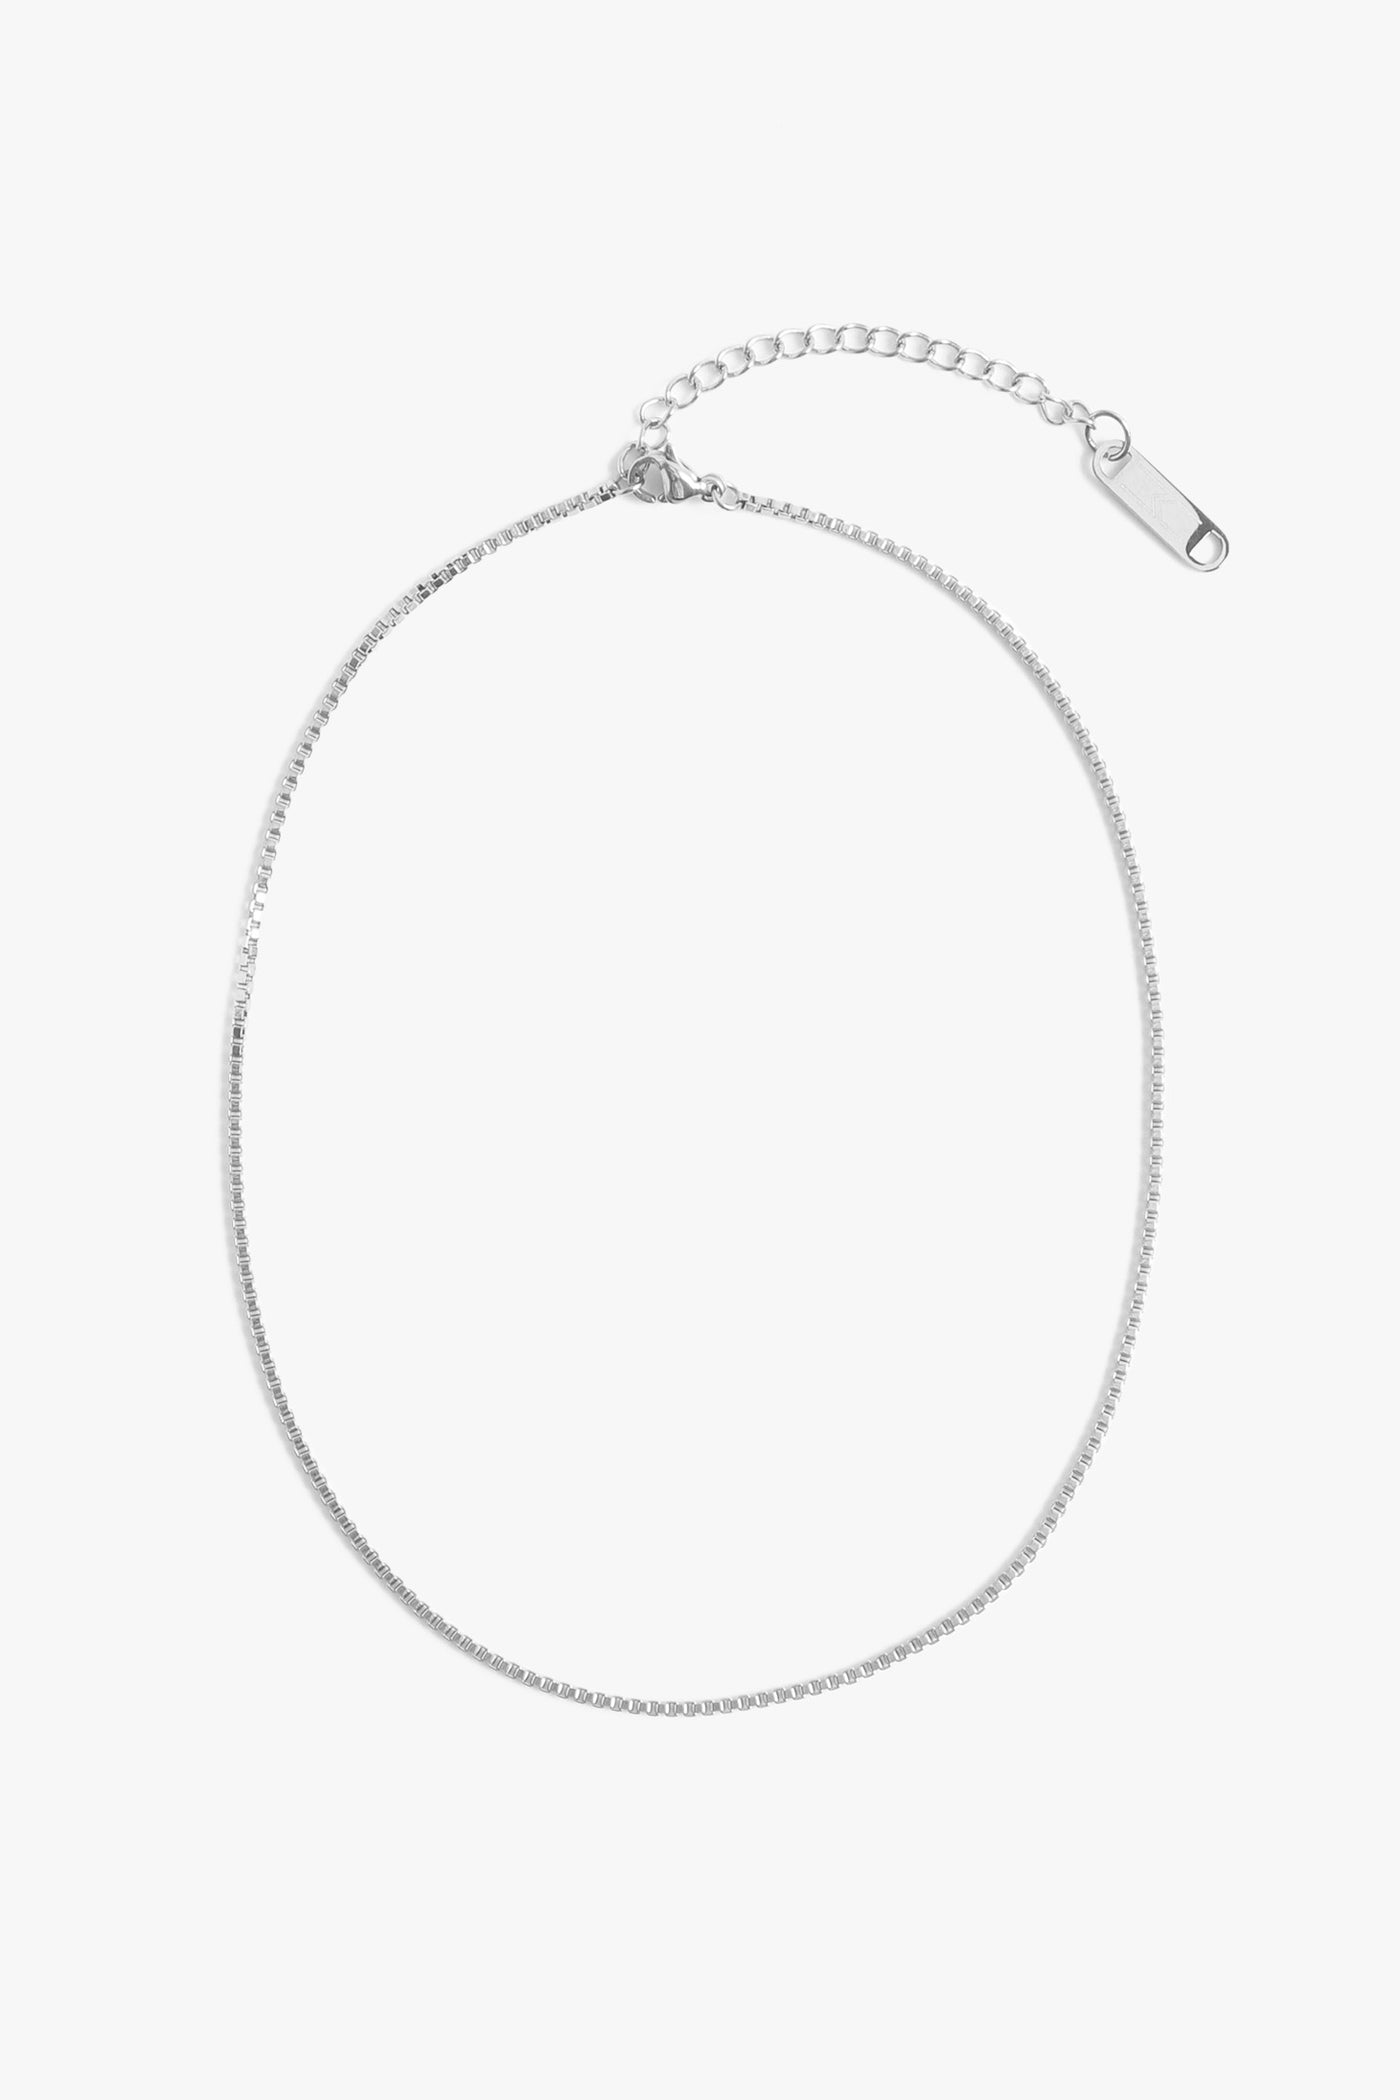 Marrin Costello Jewelry Nile Choker delicate dainty box link chain with lobster clasp closure and extender. Waterproof, sustainable, hypoallergenic. Polished stainless steel.